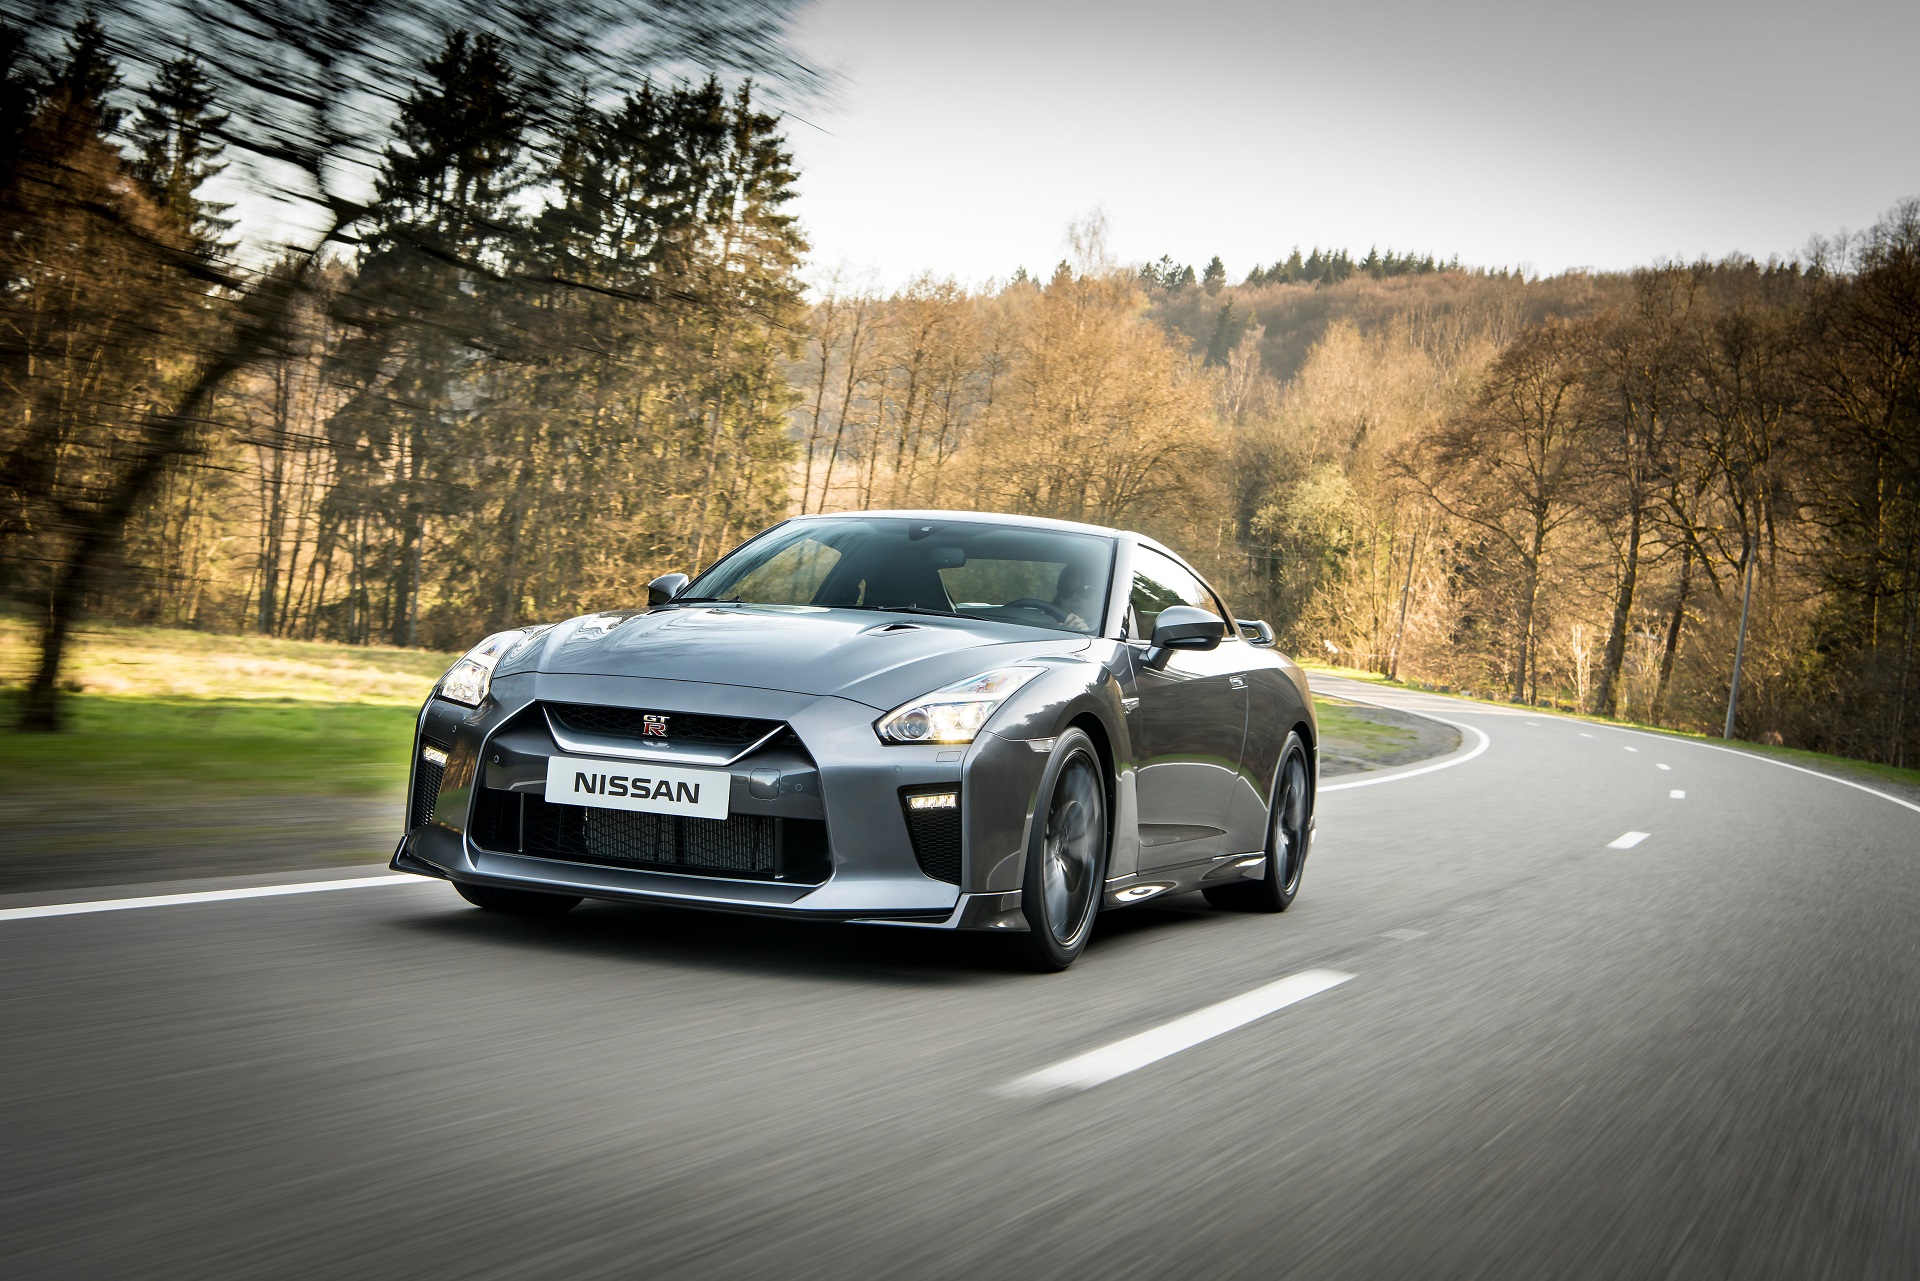 Nissan Gt R Detailed In New Video And Photos